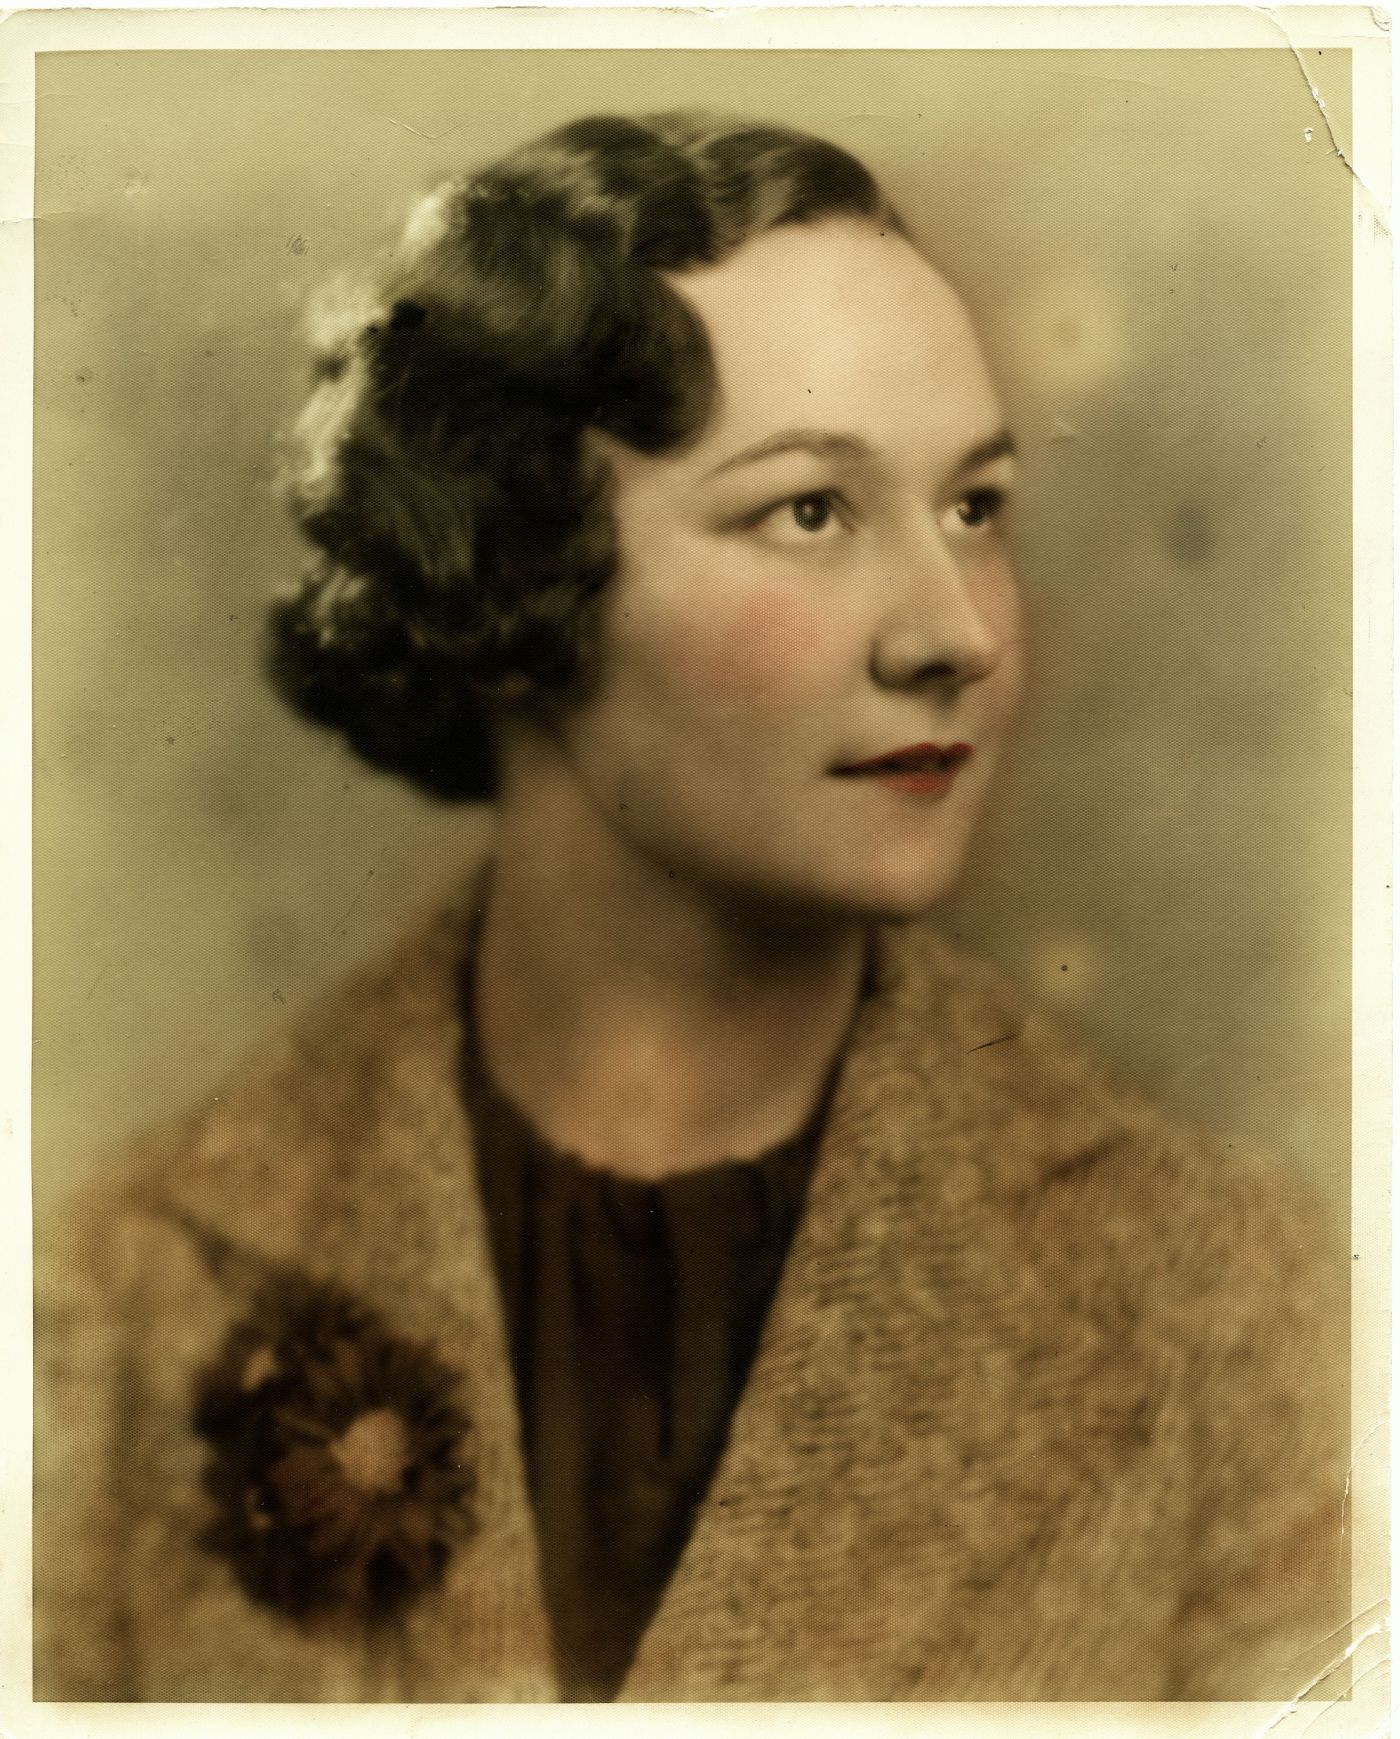 Colour studio photograph showing the head and shoulders of a middle-aged woman in three-quarter profile view. She has short, wavyhair and wears a jacket with flowers in the buttonhole.